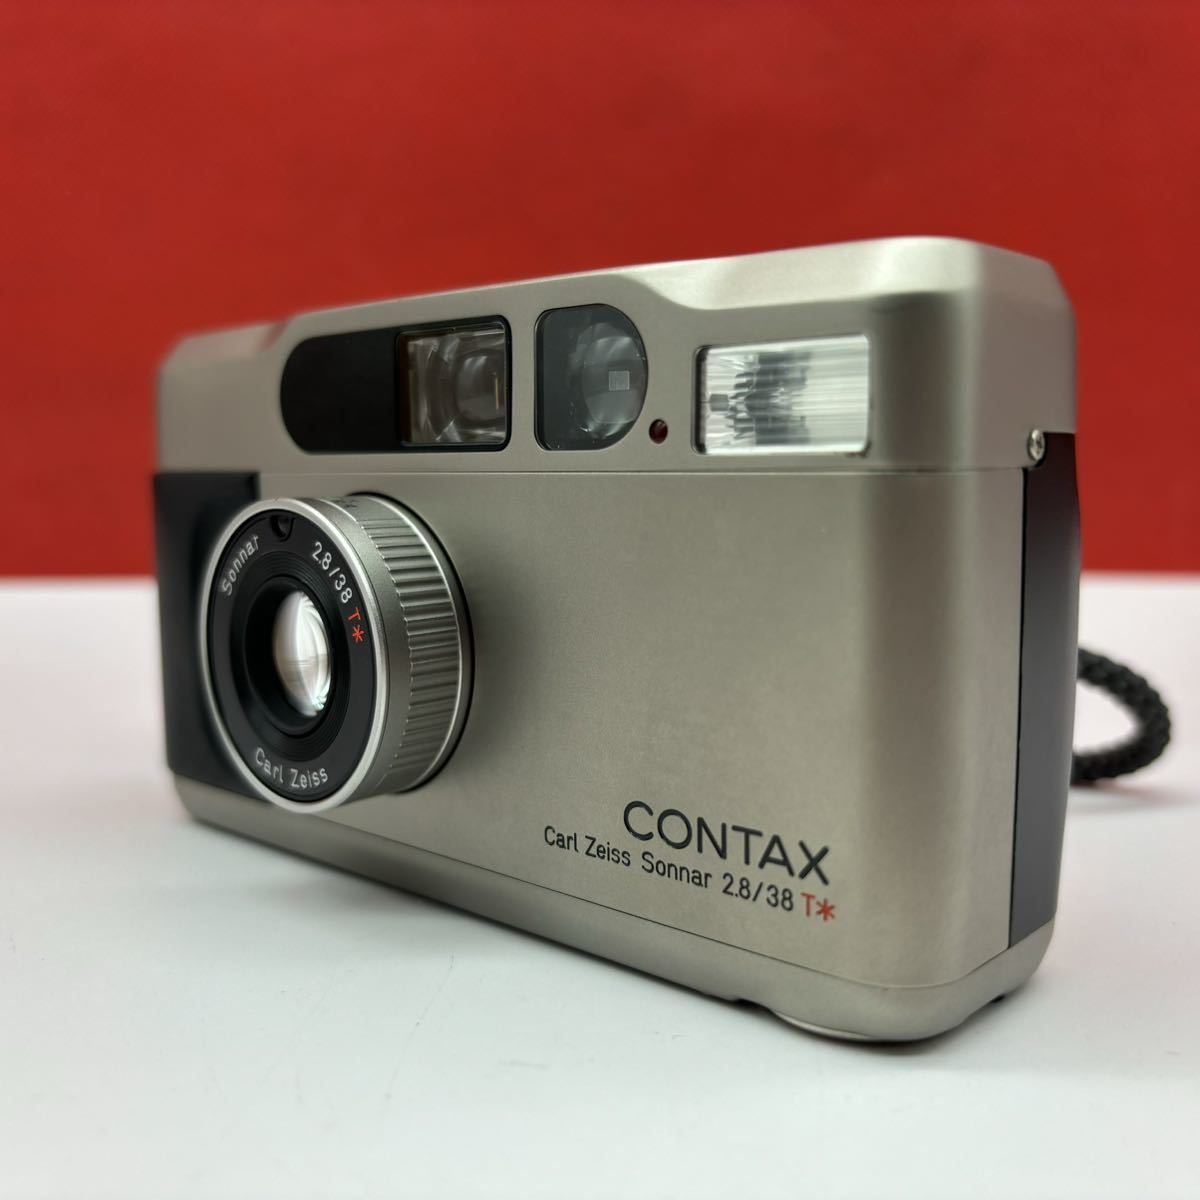 ◆ CONTAX T2 コンパクトフィルムカメラ Carl Zeiss Sonnar 2.8/38 T* シャッター、フラッシュOK 箱付き コンタックス_画像2